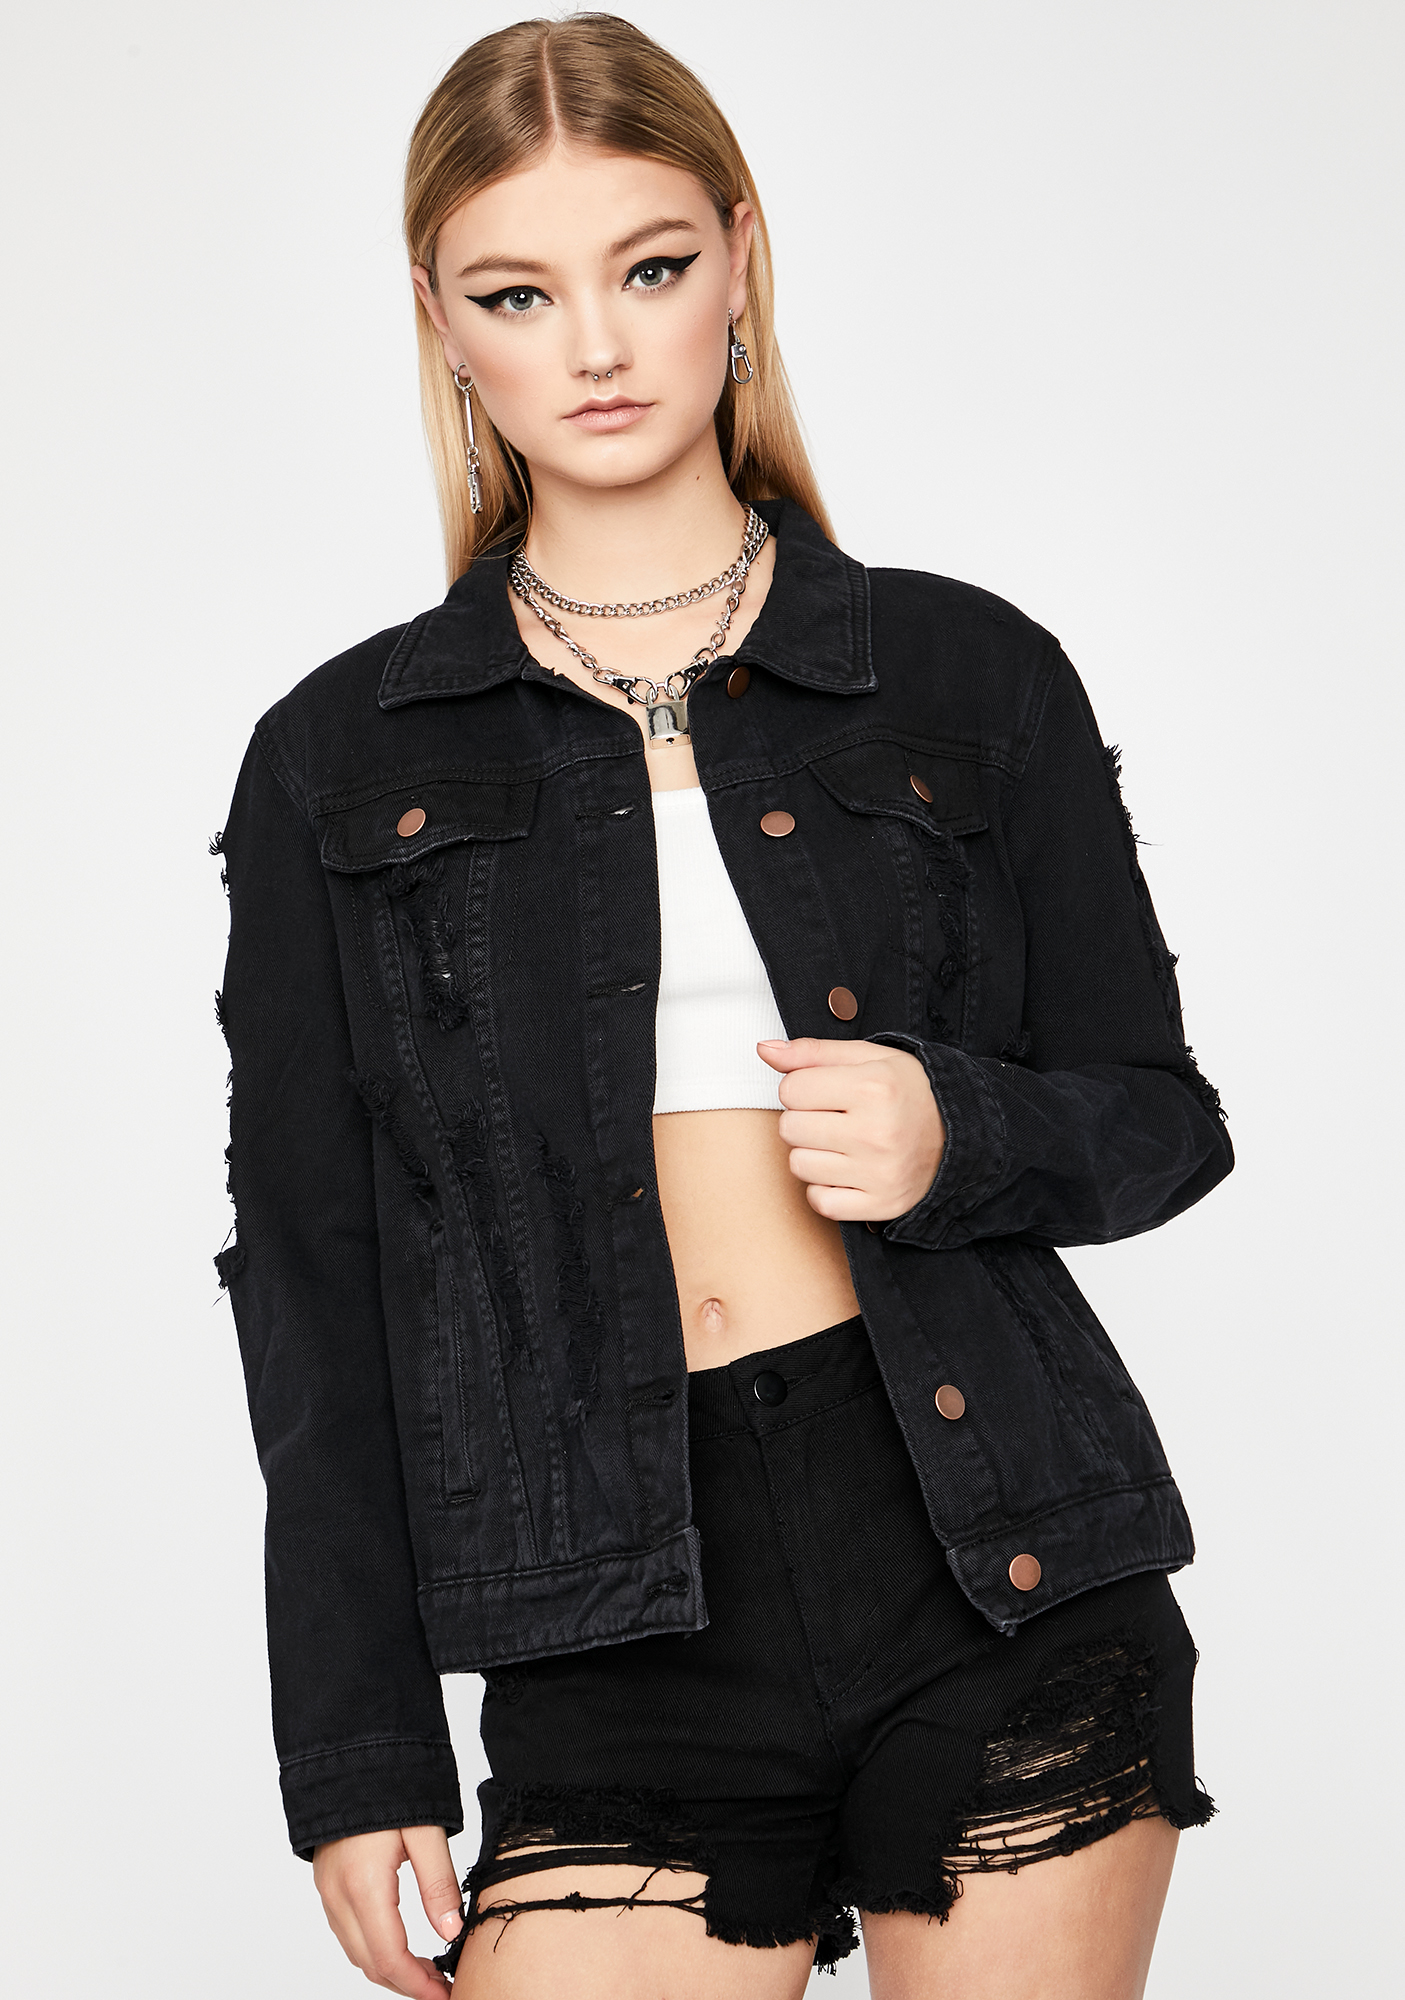 Denim Jacket Distressed Ripped Open Back Collared Button Up Black ...